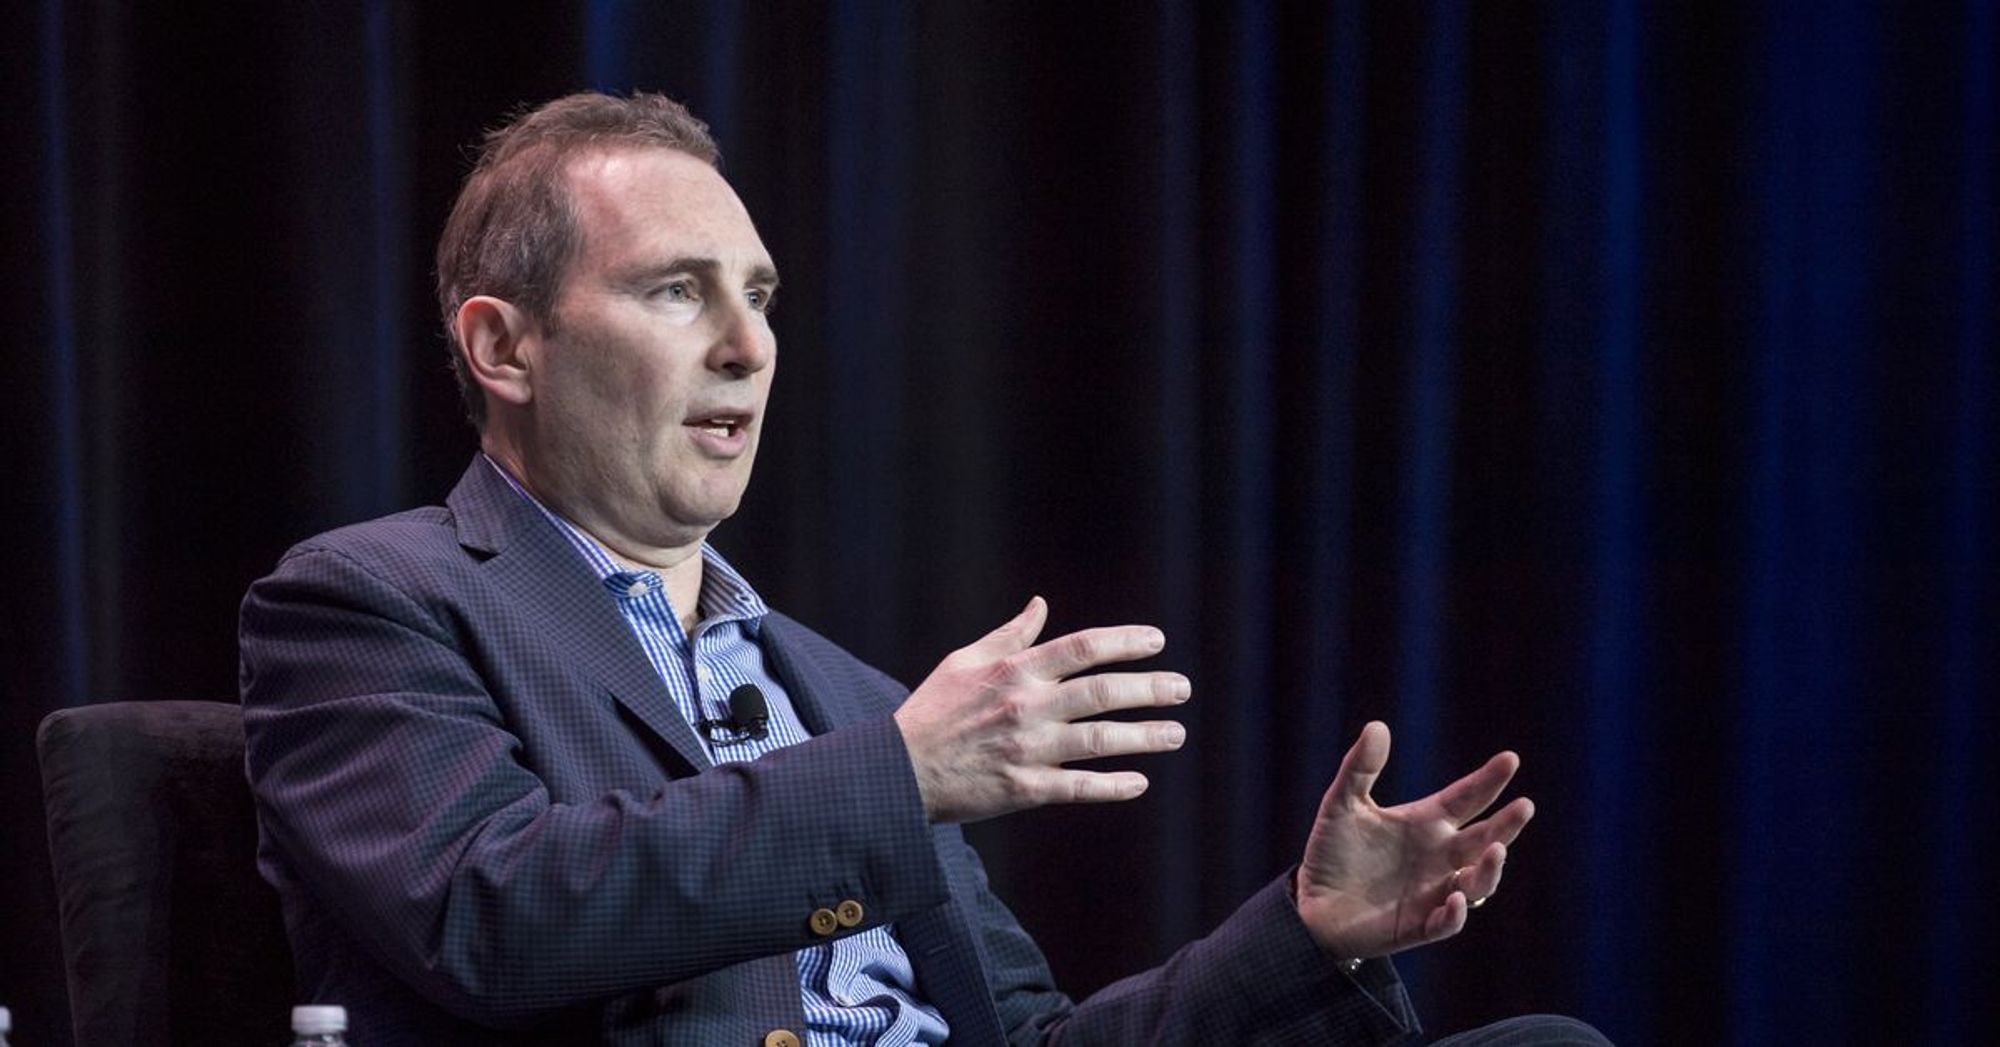 Andy Jassy officially takes over as Amazon CEO from Jeff Bezos